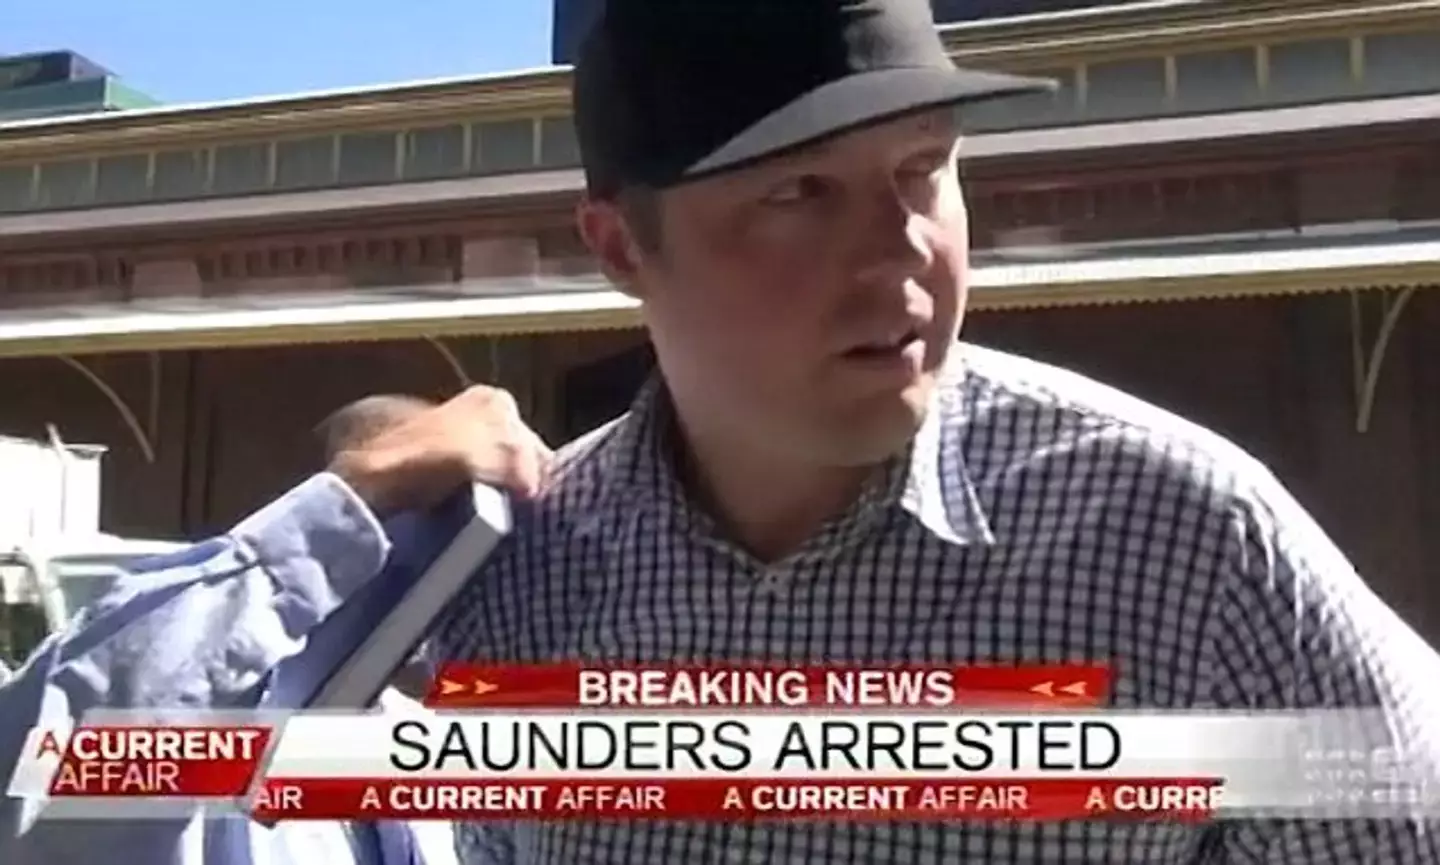 Saunders eventually turned himself into the police, receiving a 12 month jail sentence.